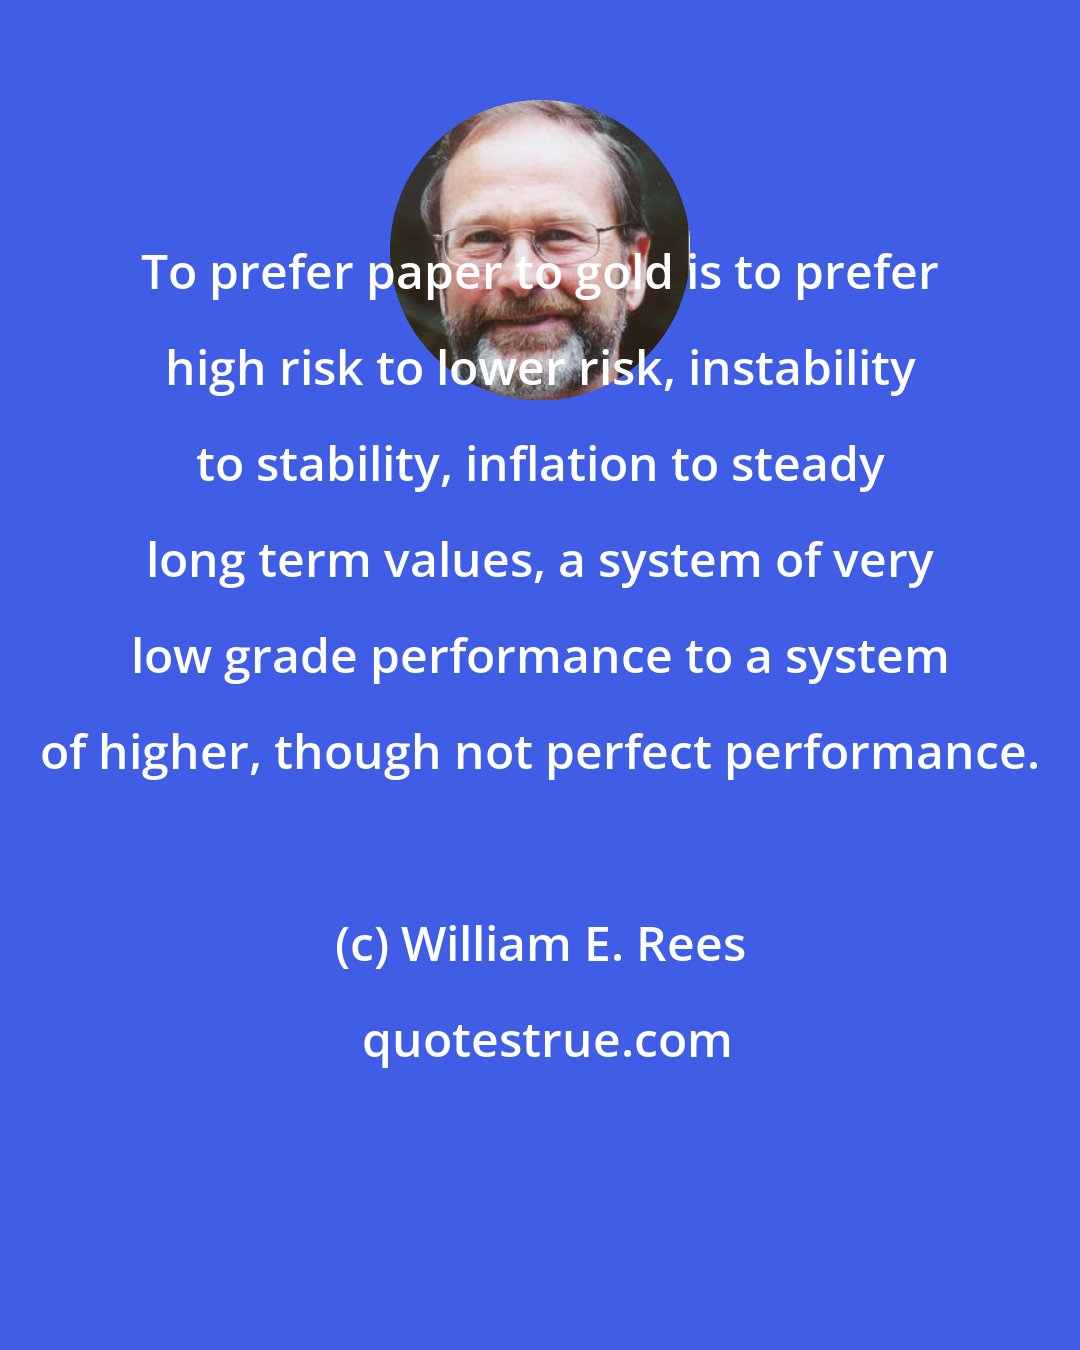 William E. Rees: To prefer paper to gold is to prefer high risk to lower risk, instability to stability, inflation to steady long term values, a system of very low grade performance to a system of higher, though not perfect performance.